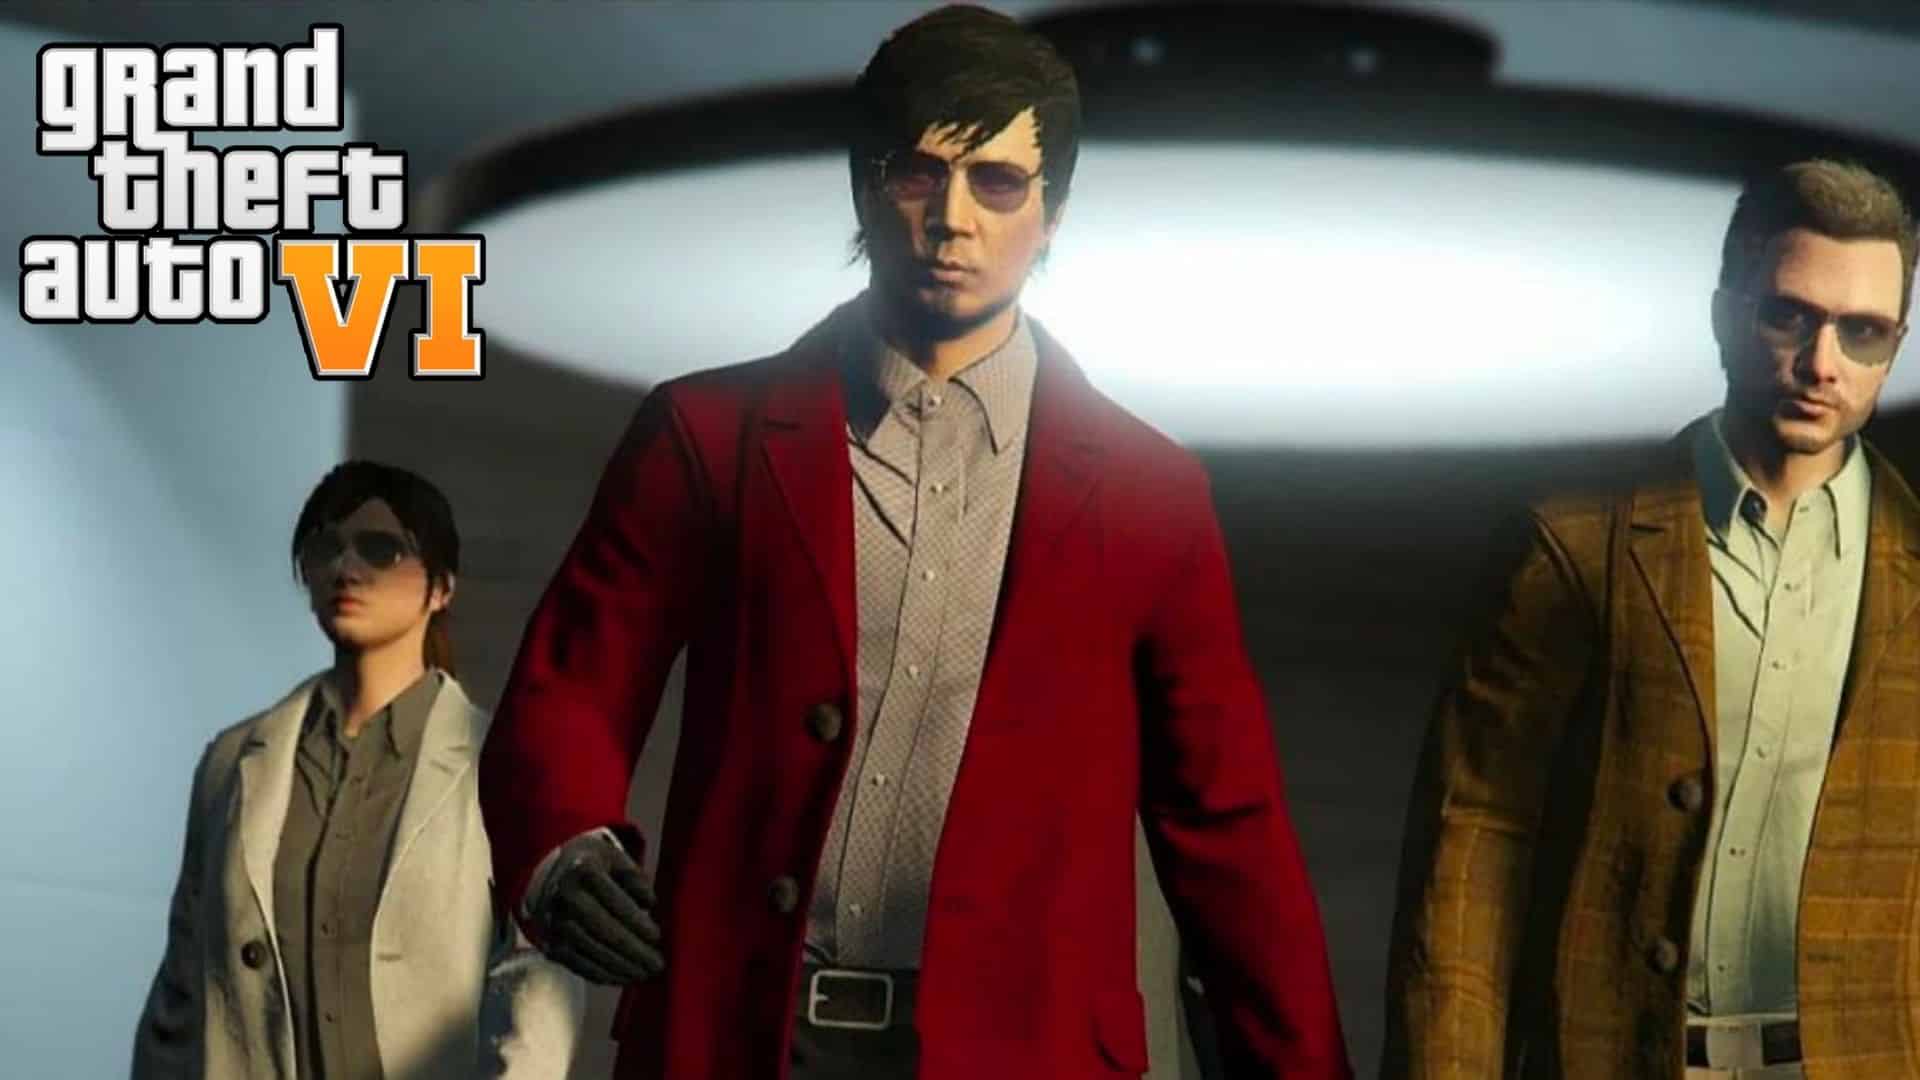 Gta 6 Leaker Claims To Reveals Characters And Story Details